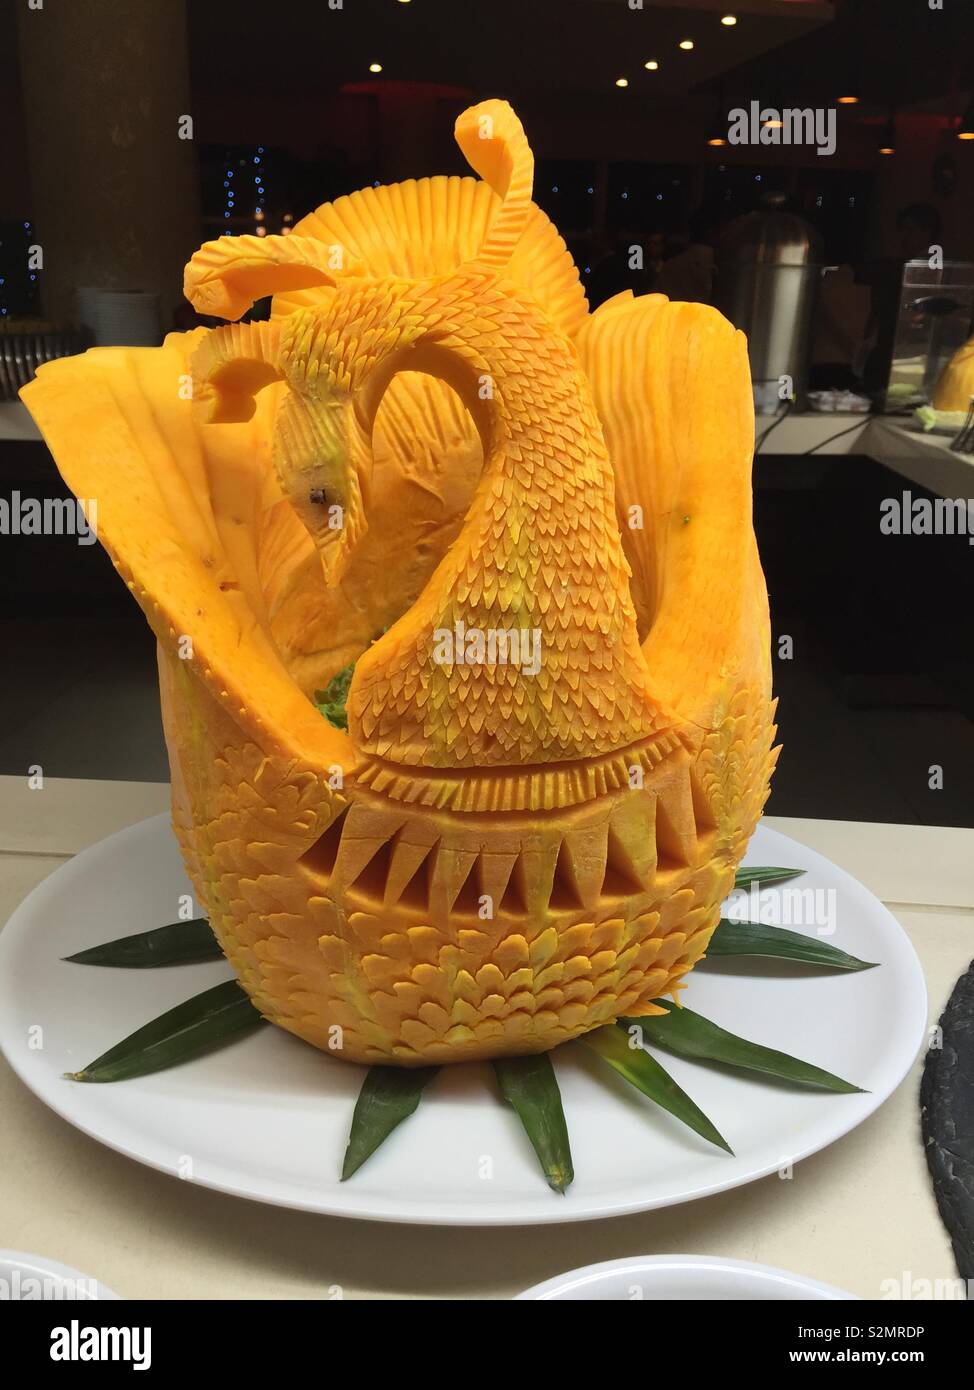 Food art carving Stock Photo